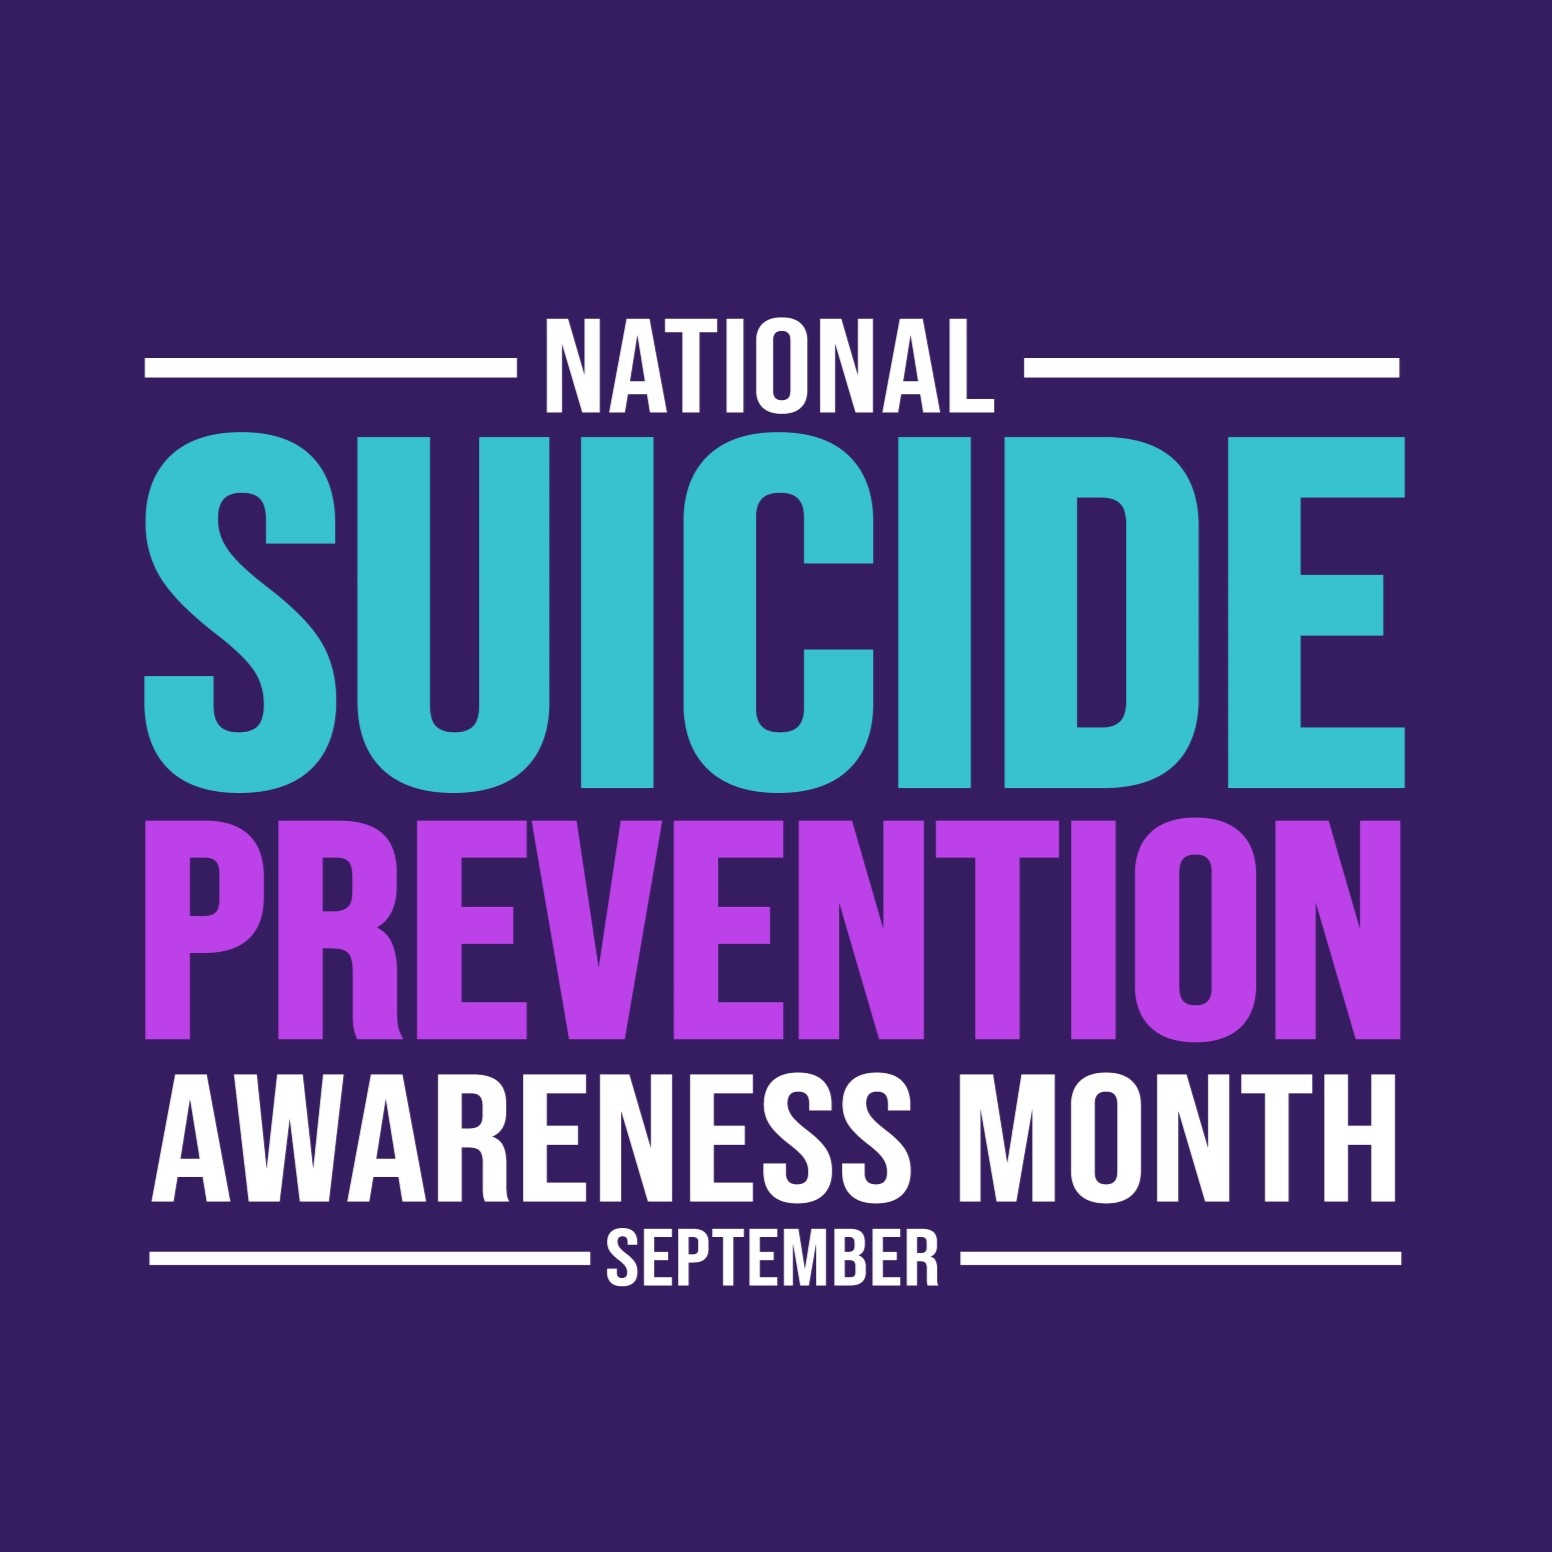 National Suicide Awareness Month